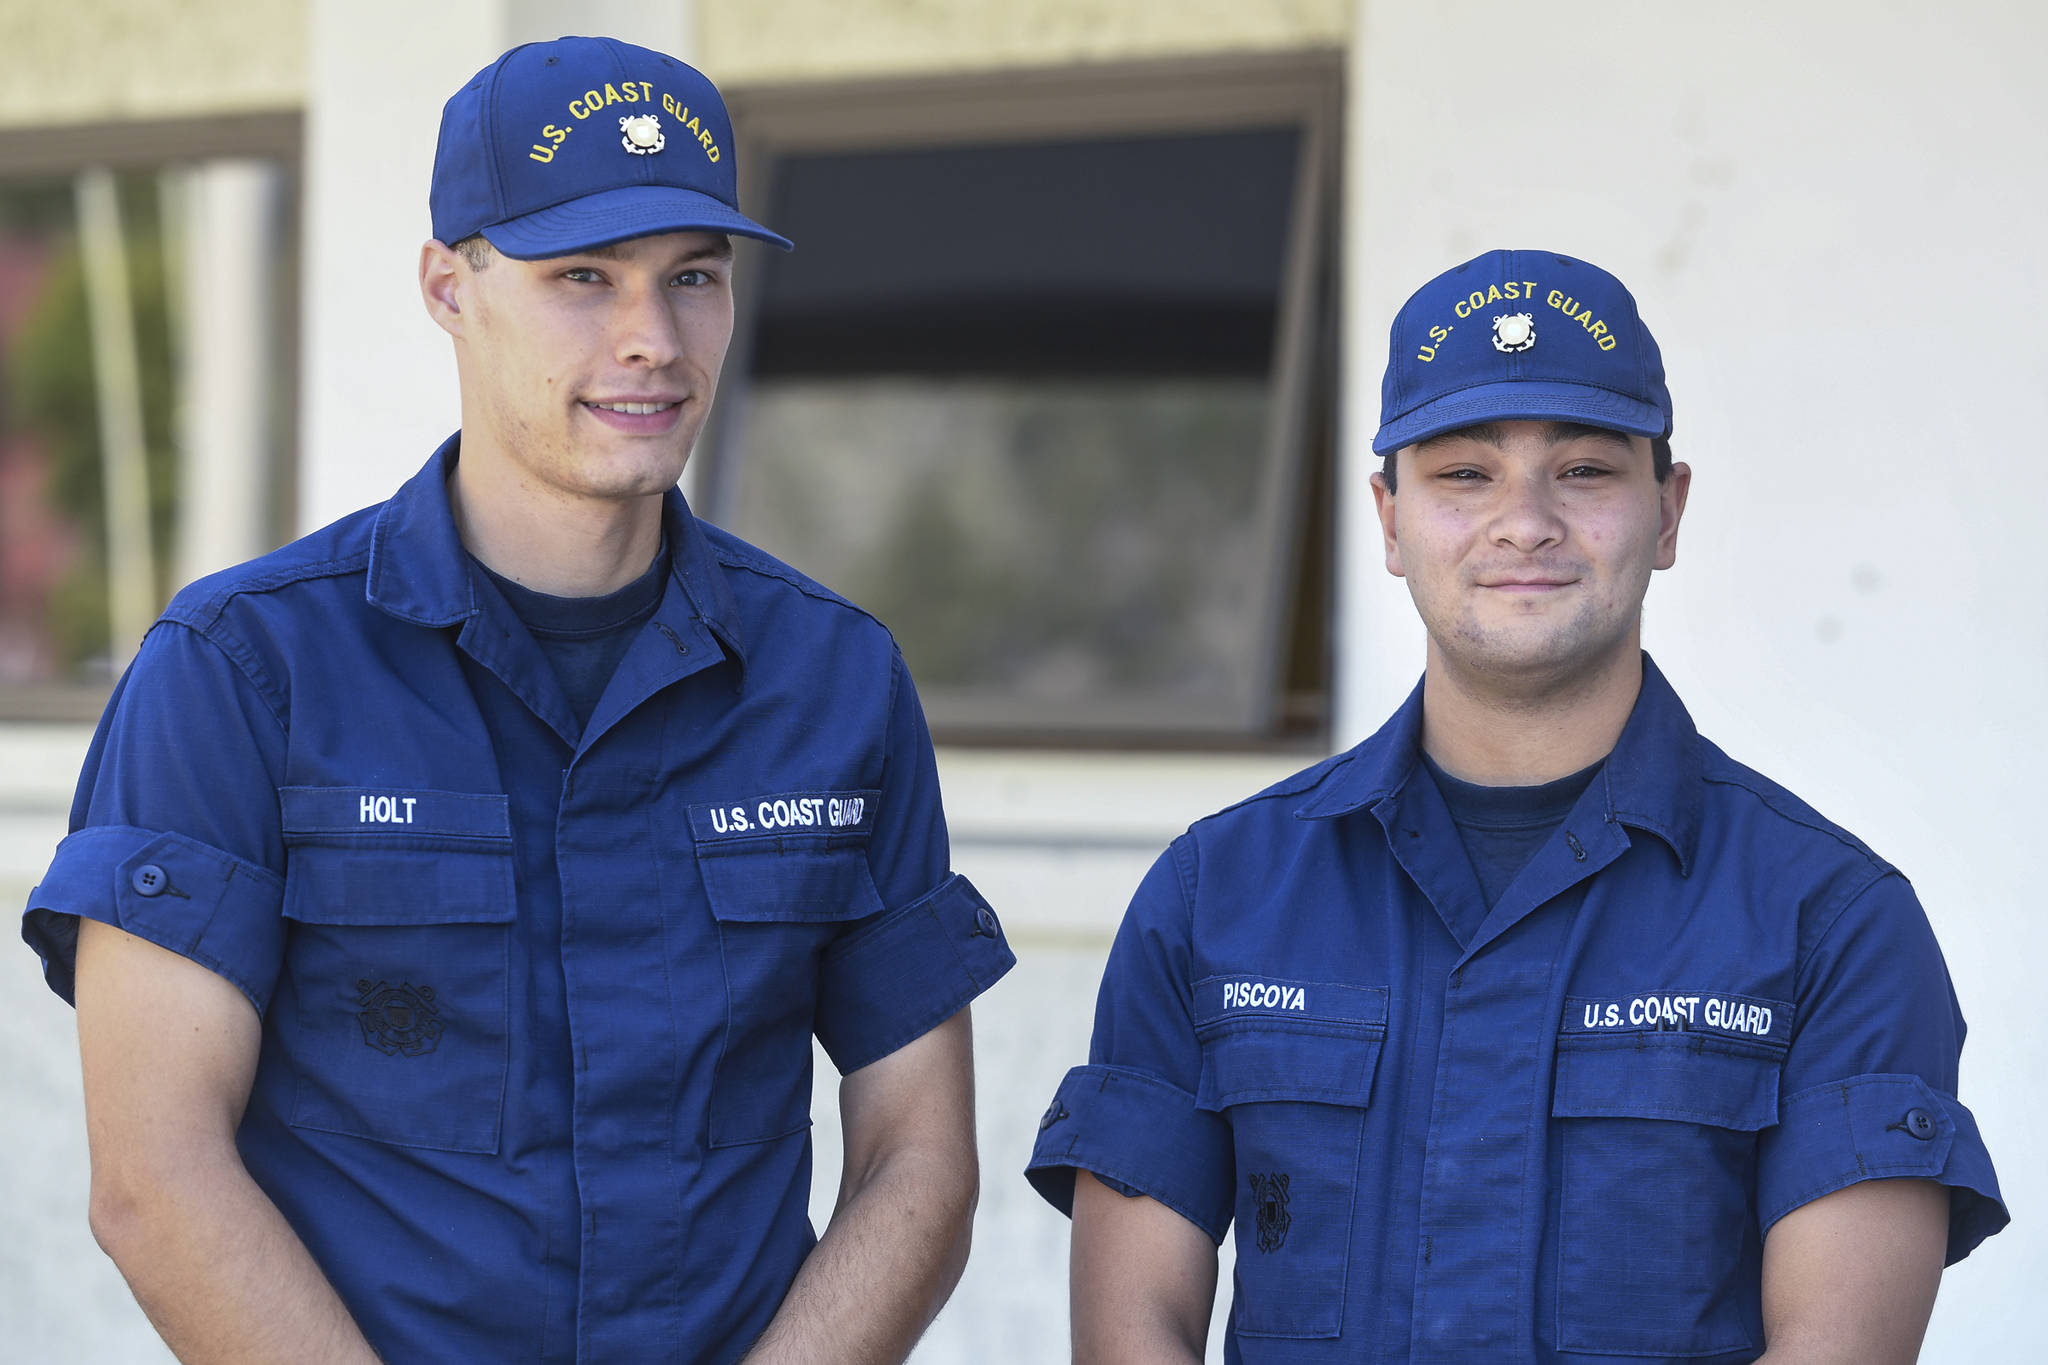 Seamen Logan Holt, left, and Daniel Piscoya pose outside of U.S. Coast Guard Station Juneau on Friday, Aug. 9, 2019. Both are taking advantage of the Coast Guard’s College Student Pre-Commissioning Initiative program and have recently returned from basic training. (Michael Penn | Juneau Empire)